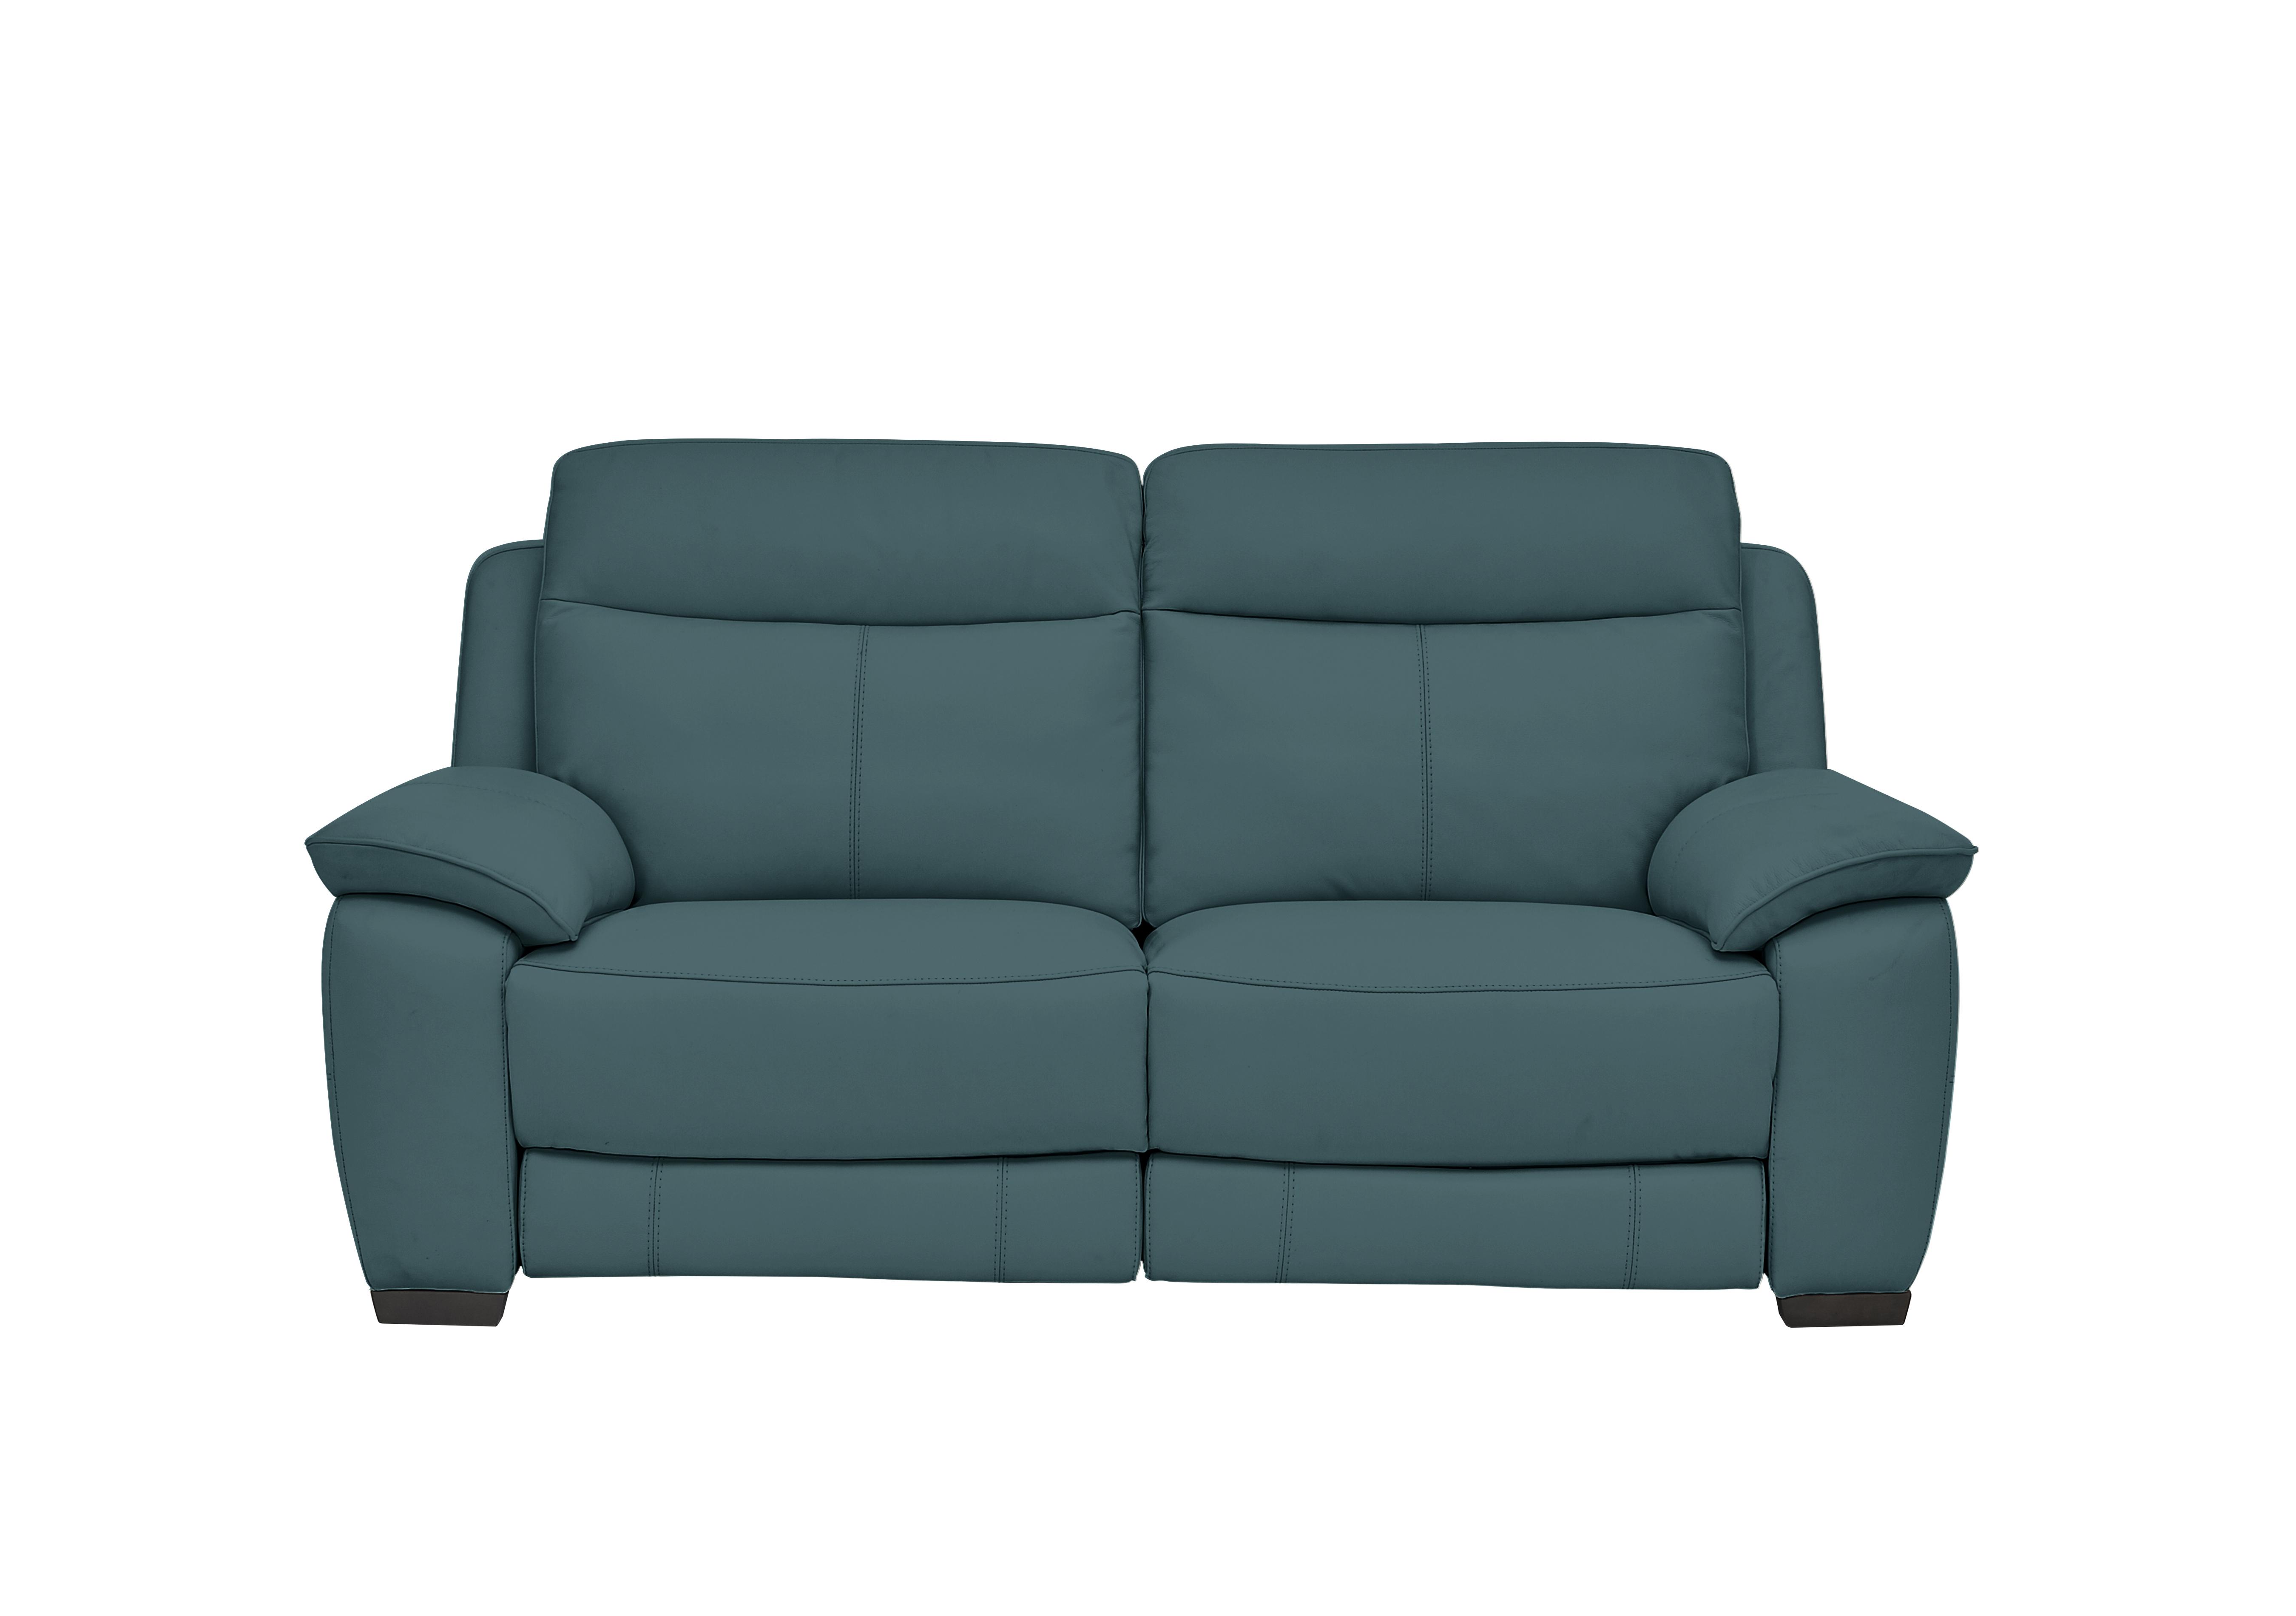 Starlight Express 2 Seater Leather Recliner Sofa with Power Headrests in Bv-301e Lake Green on Furniture Village